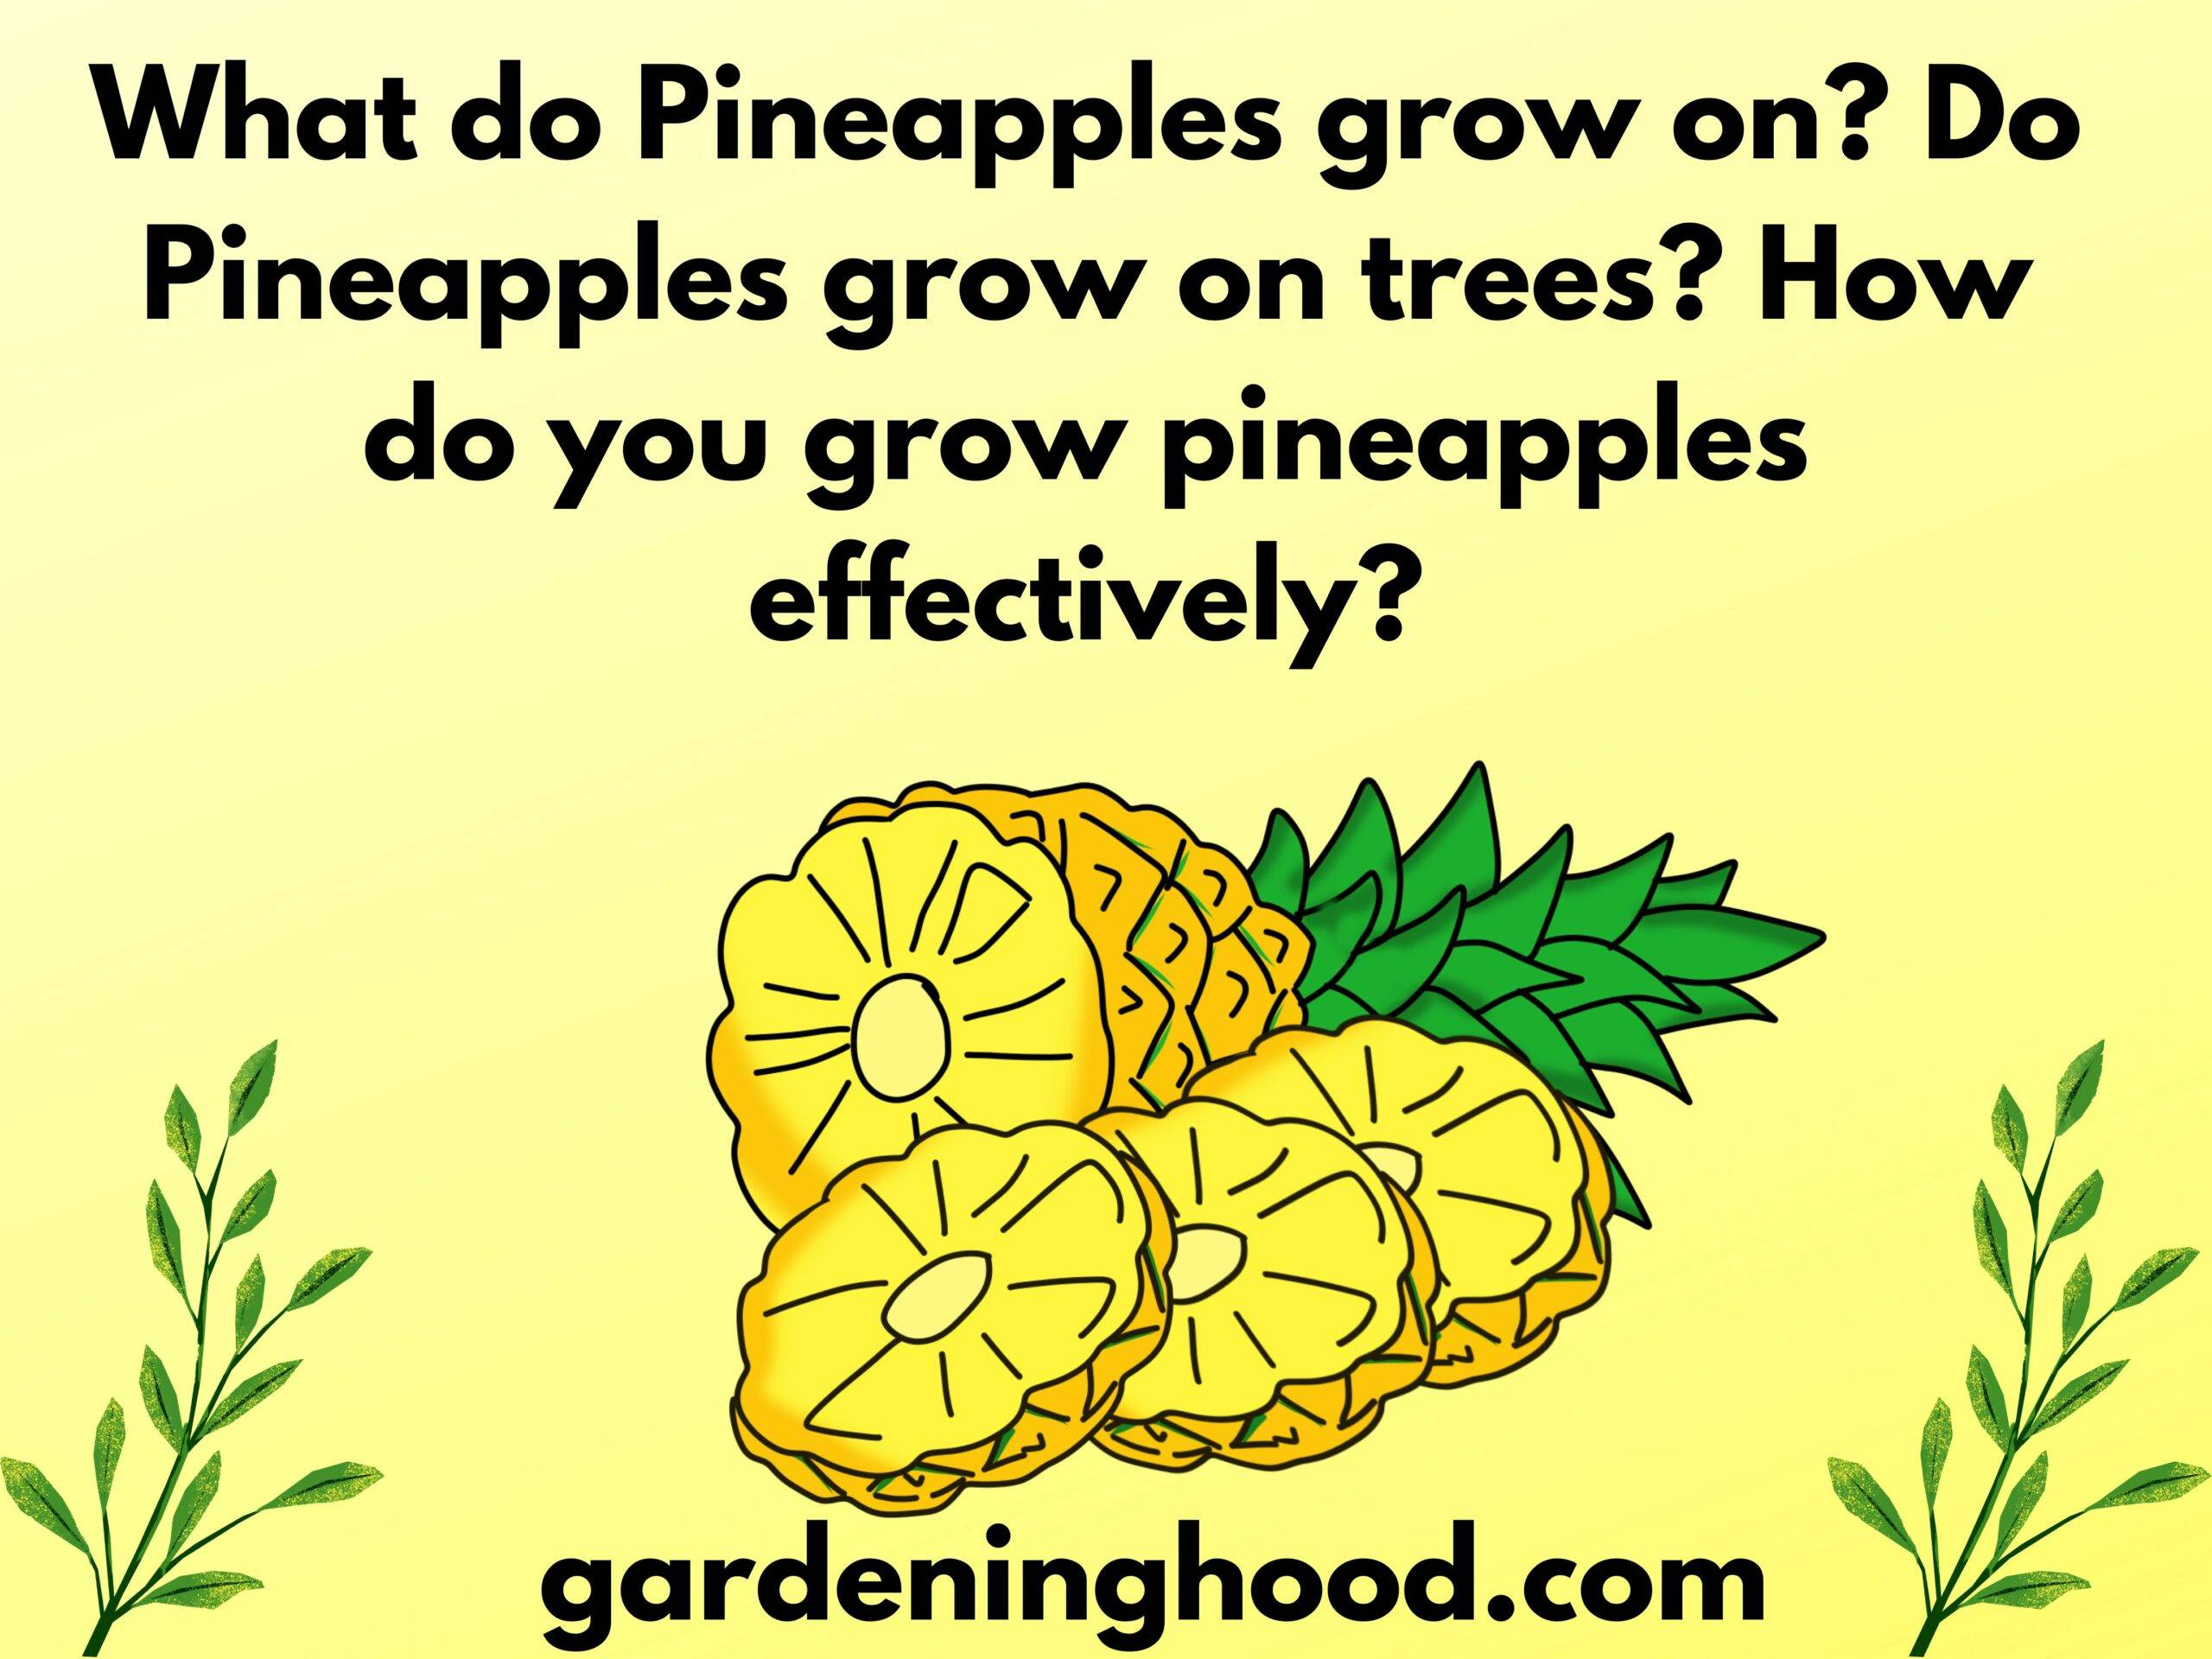 What do Pineapples grow on? Do Pineapples grow on trees? How do you grow pineapples effectively?